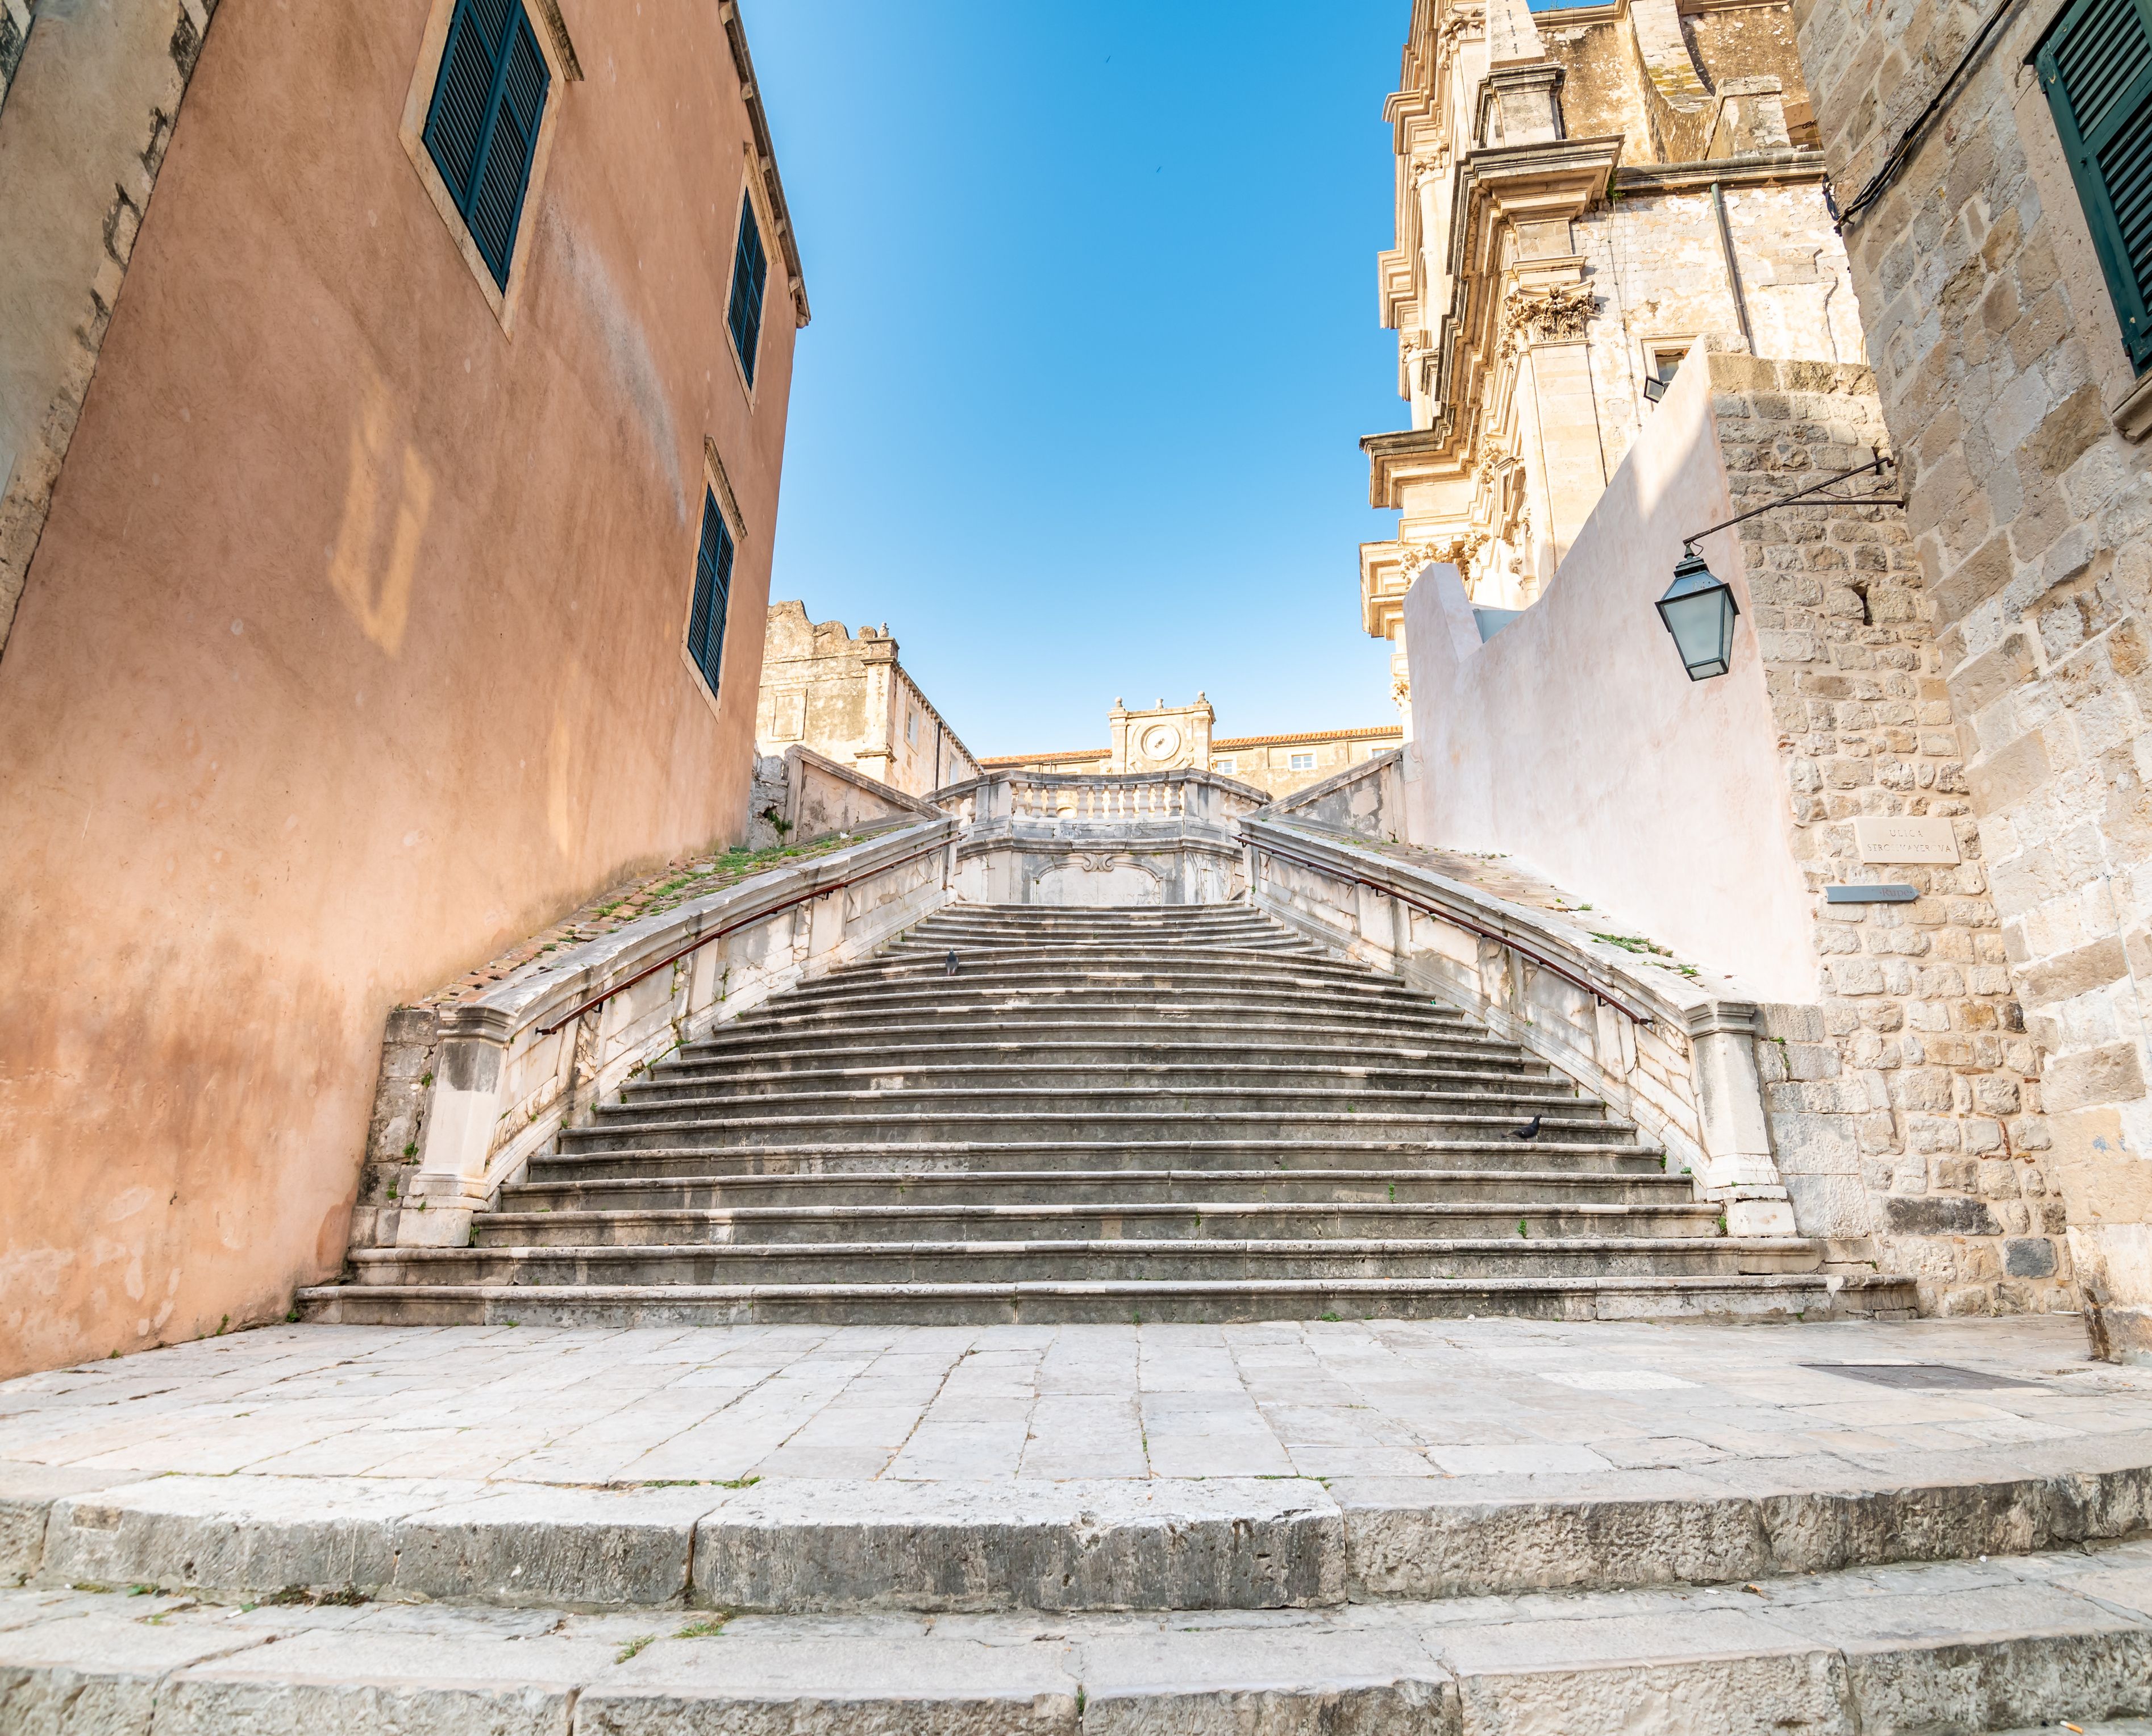 Staircase in Old Town used as filming site for Game of Thrones